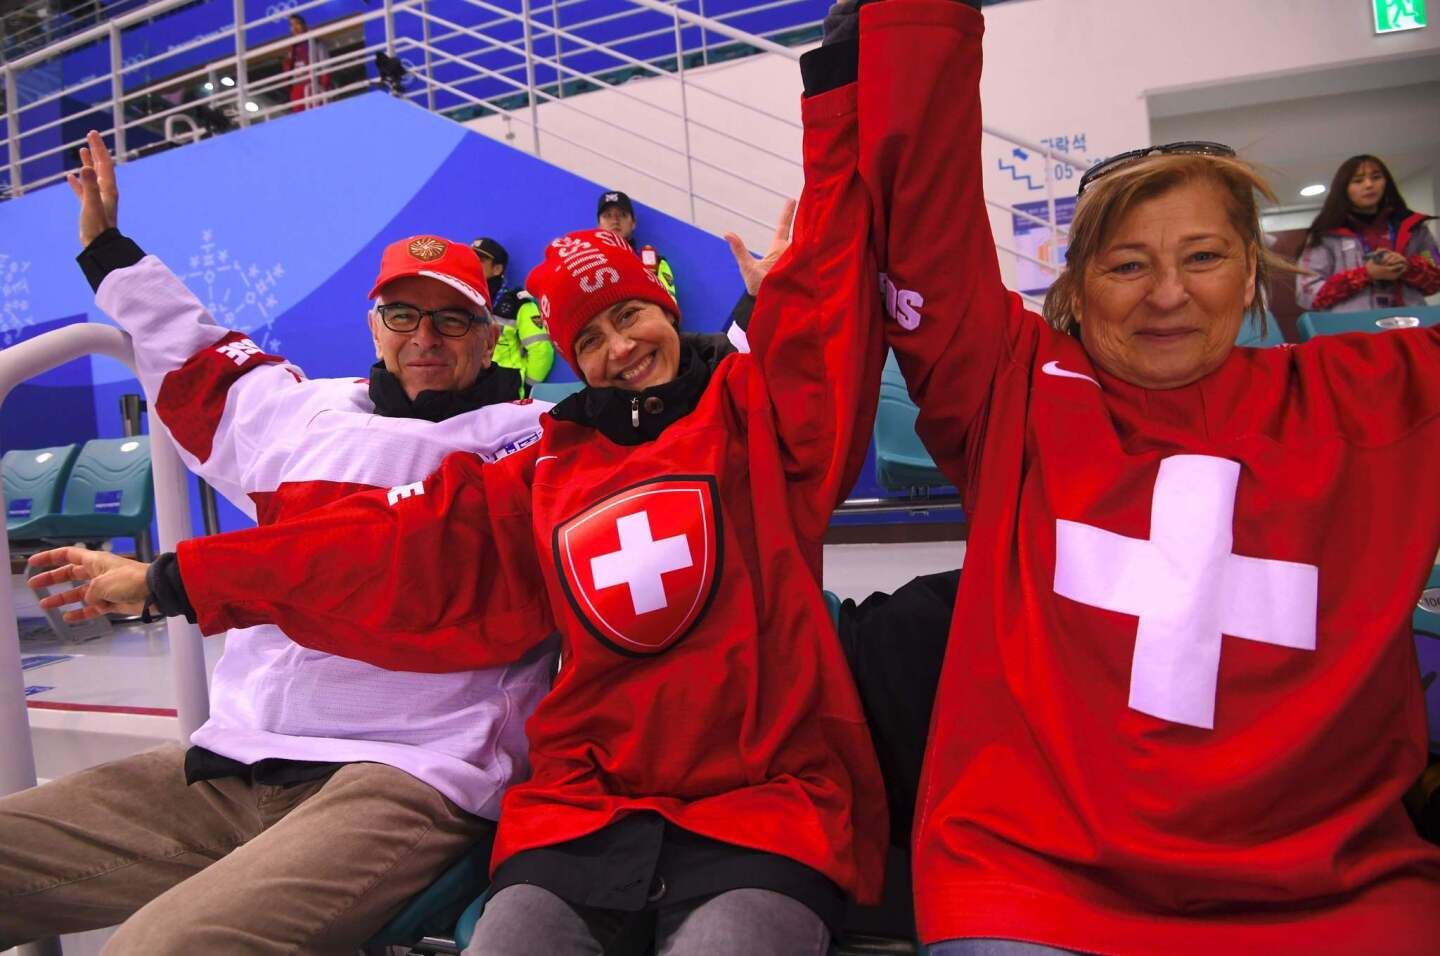 Switzerland's fans cheer in the women's quarter-final ice hockey match between the Olympic Athletes from Russia and Switzerland during the Pyeongchang 2018 Winter Olympic Games at the Kwandong Hockey Centre in Gangneung on February 17, 2018. / AFP PHOTO / Jung Yeon-jeJUNG YEON-JE/AFP/Getty Images ** OUTS - ELSENT, FPG, CM - OUTS * NM, PH, VA if sourced by CT, LA or MoD **